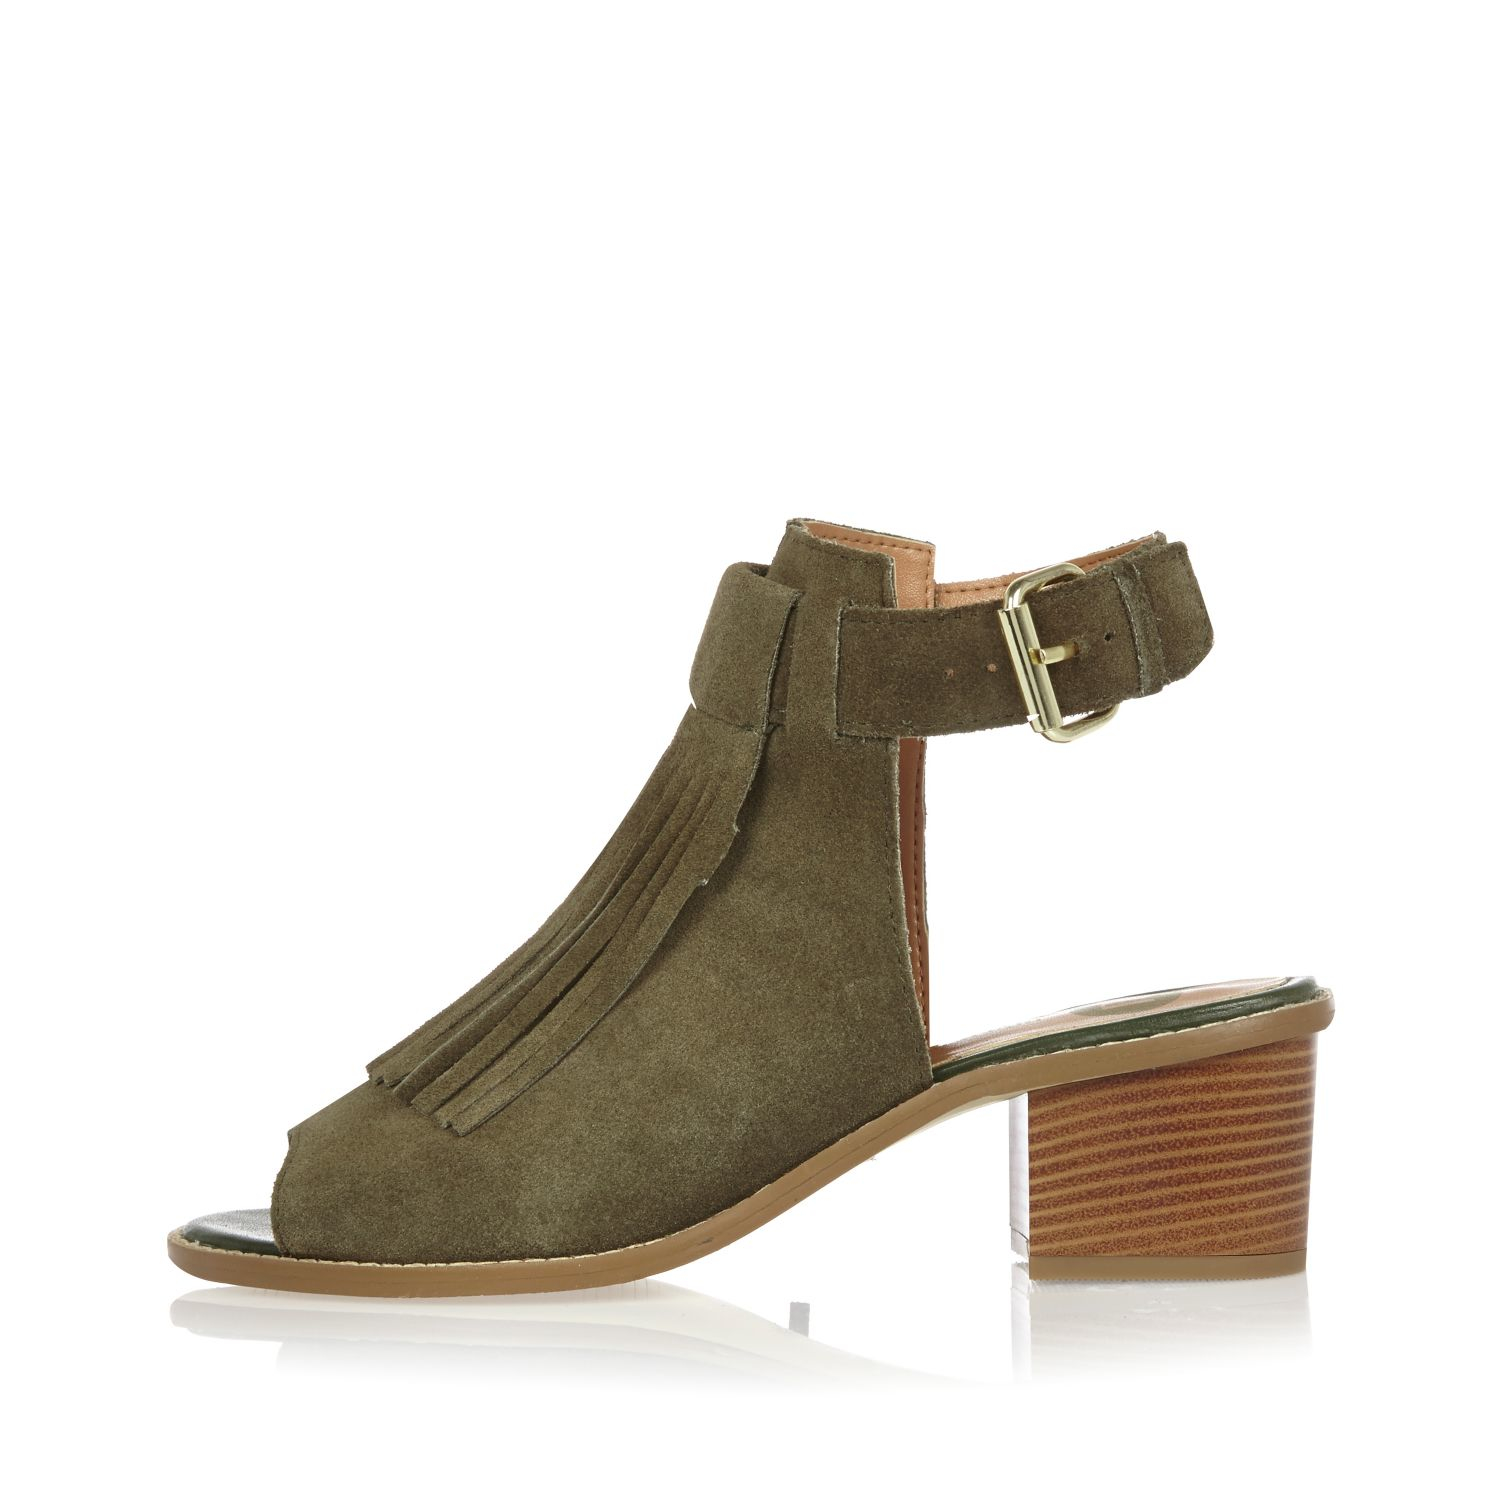 Lyst - River Island Khaki Suede Fringed Block Heel Sandals in Natural